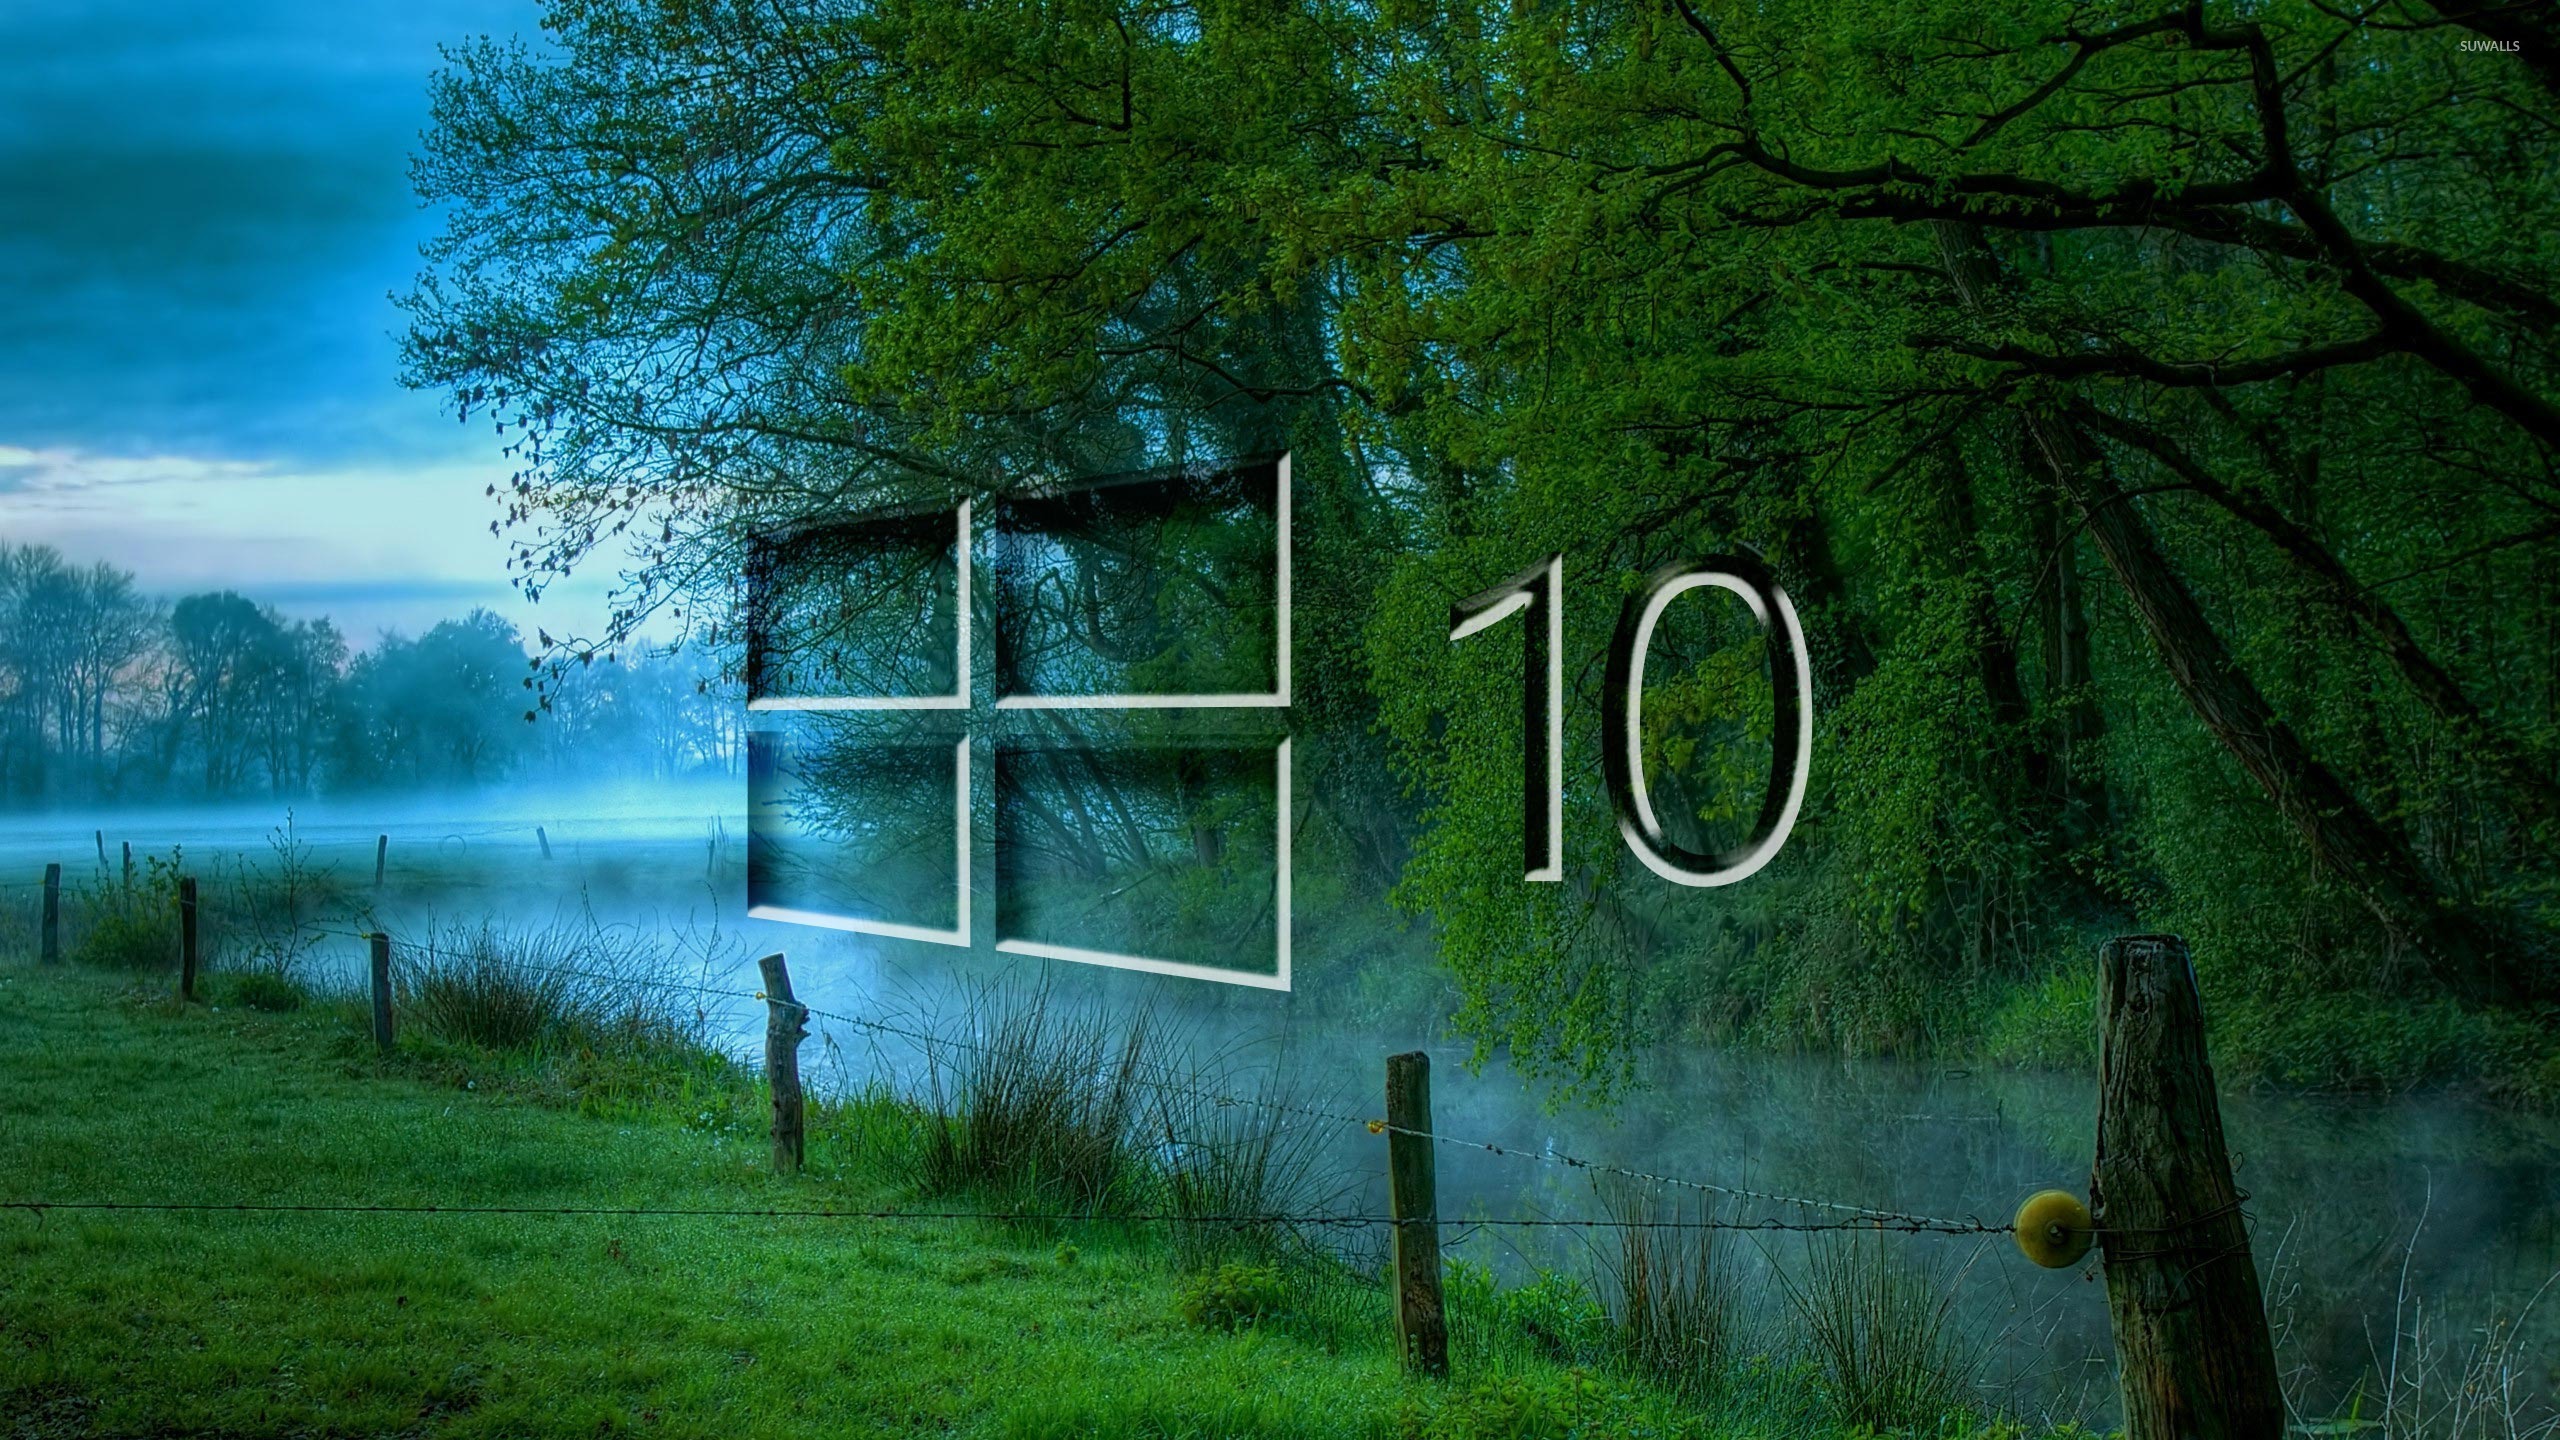 Windows 10 In The Misty Morning Glass Logo Wallpaper Computer Wallpapers